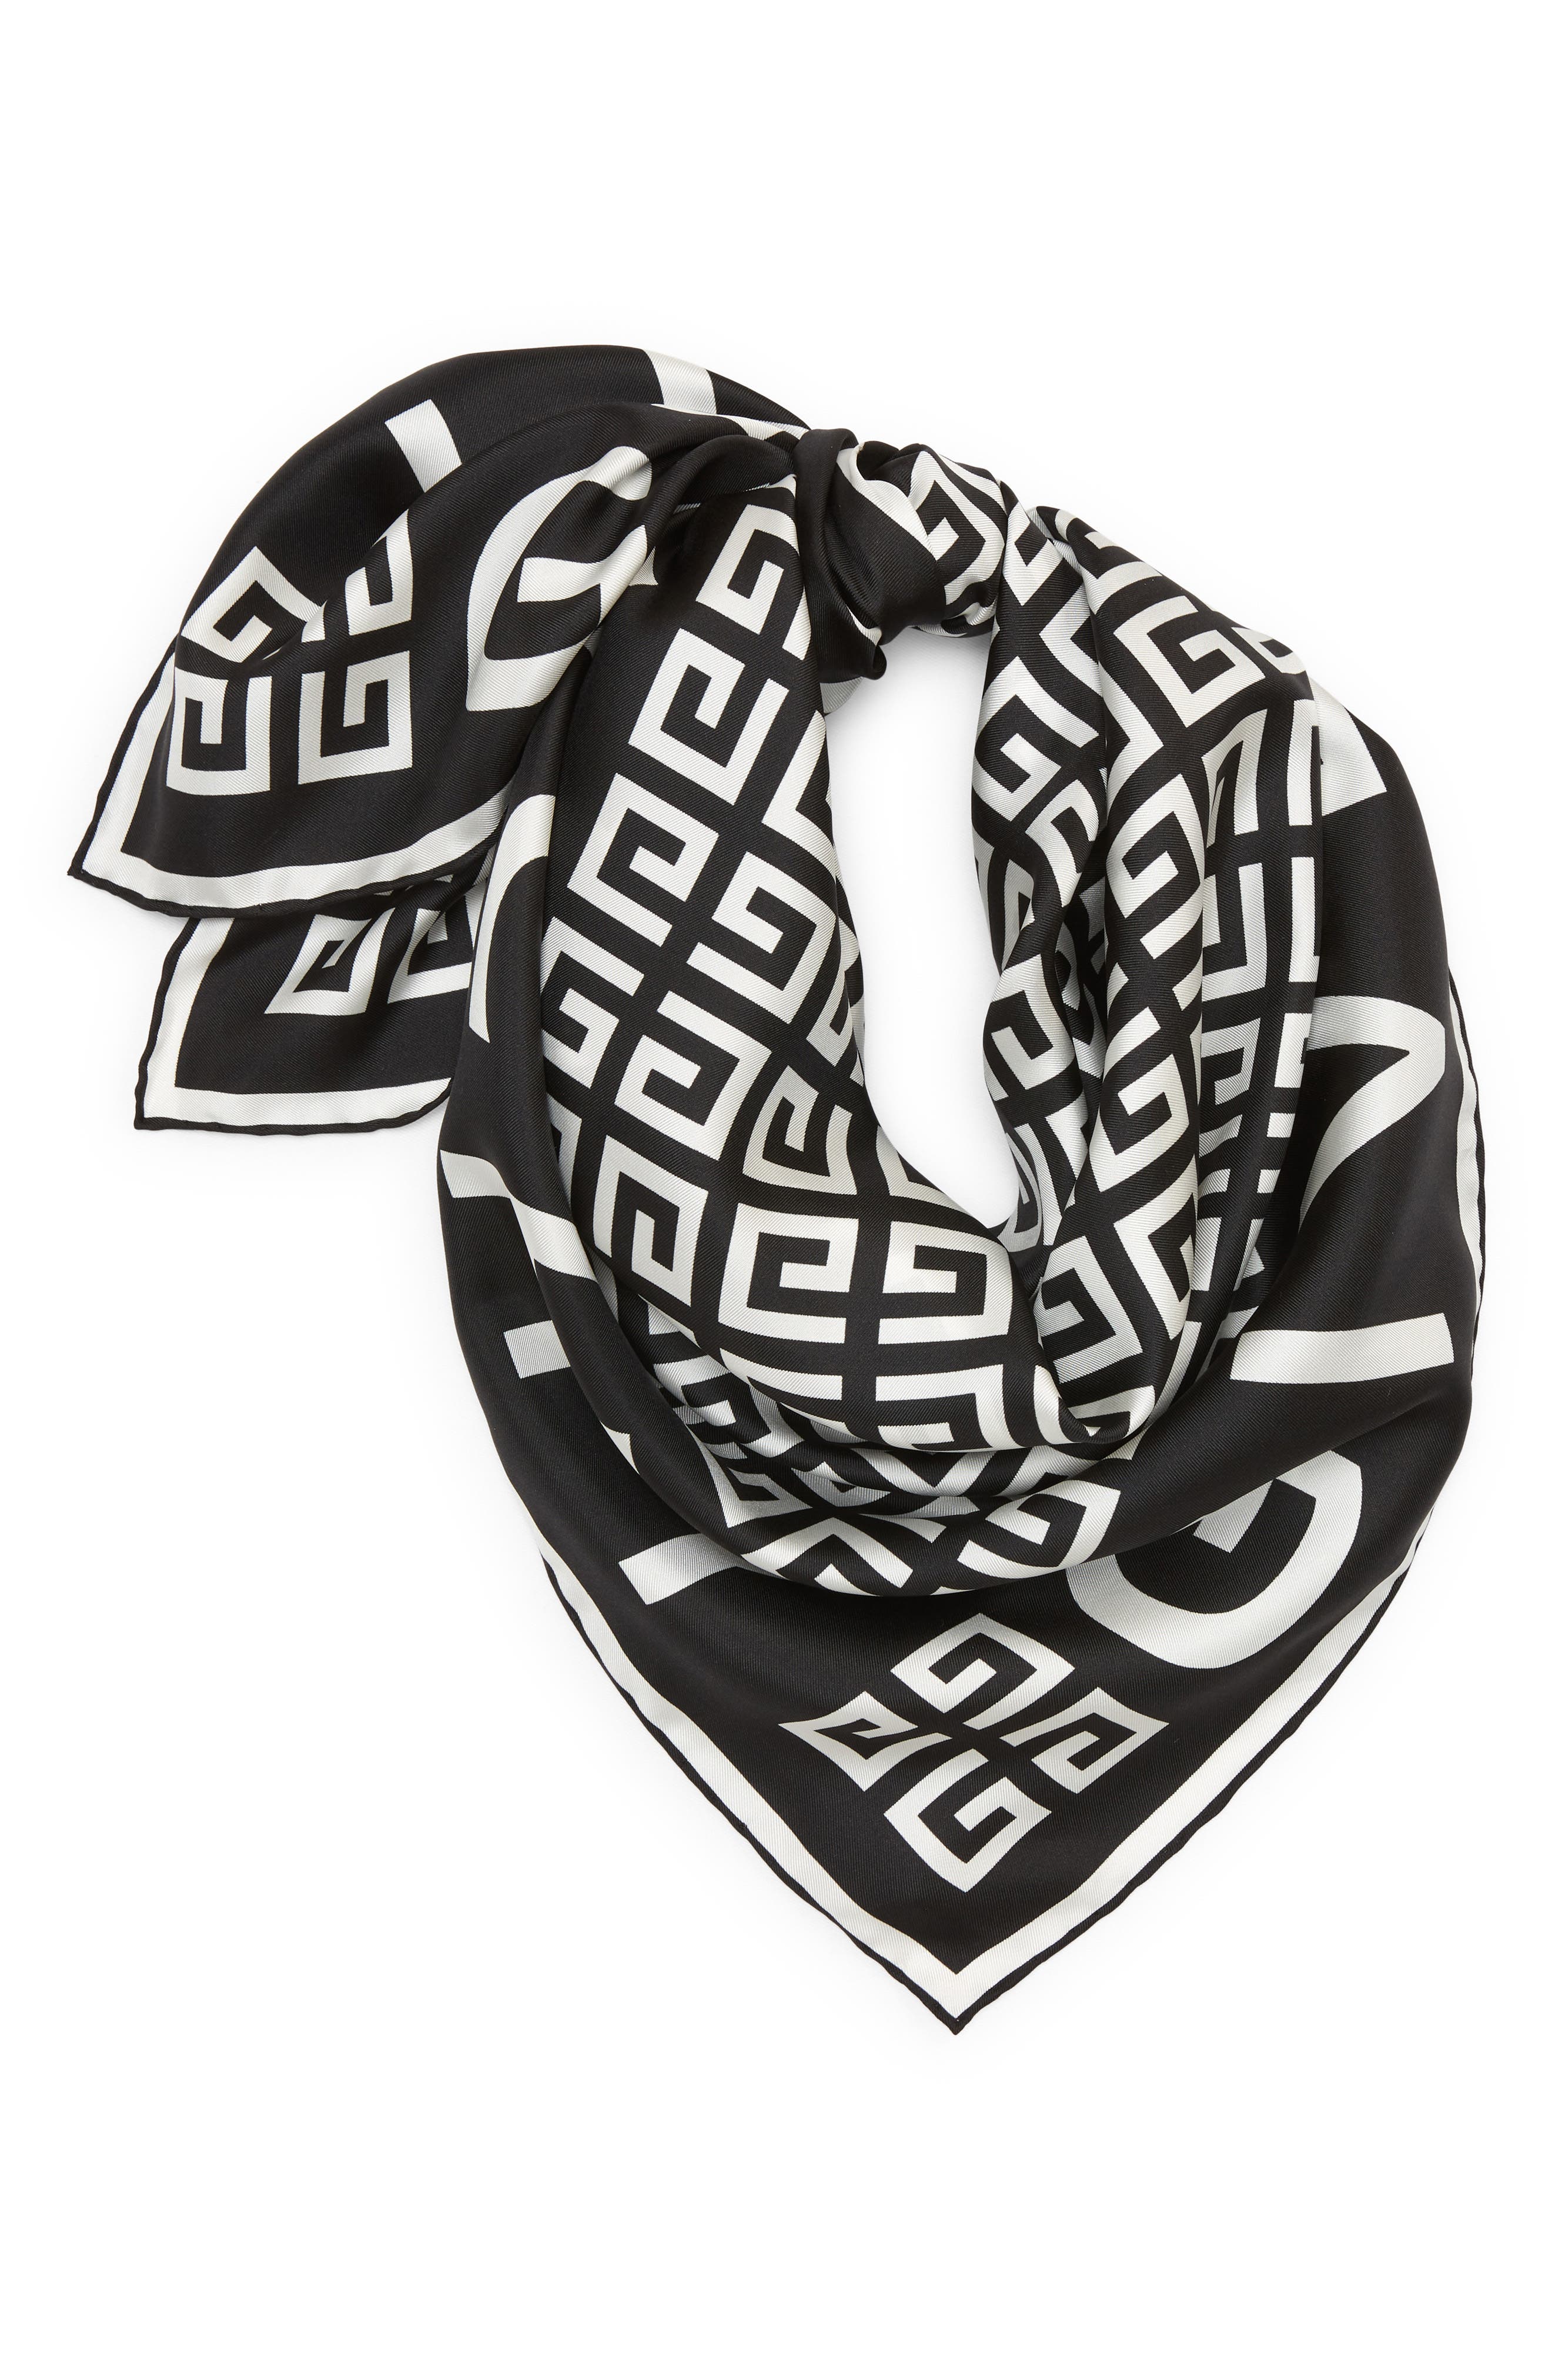 Scarf GIVENCHY multicolor Scarves Givenchy Women Women Accessories Givenchy Women Scarves Givenchy Women Scarves Givenchy Women 